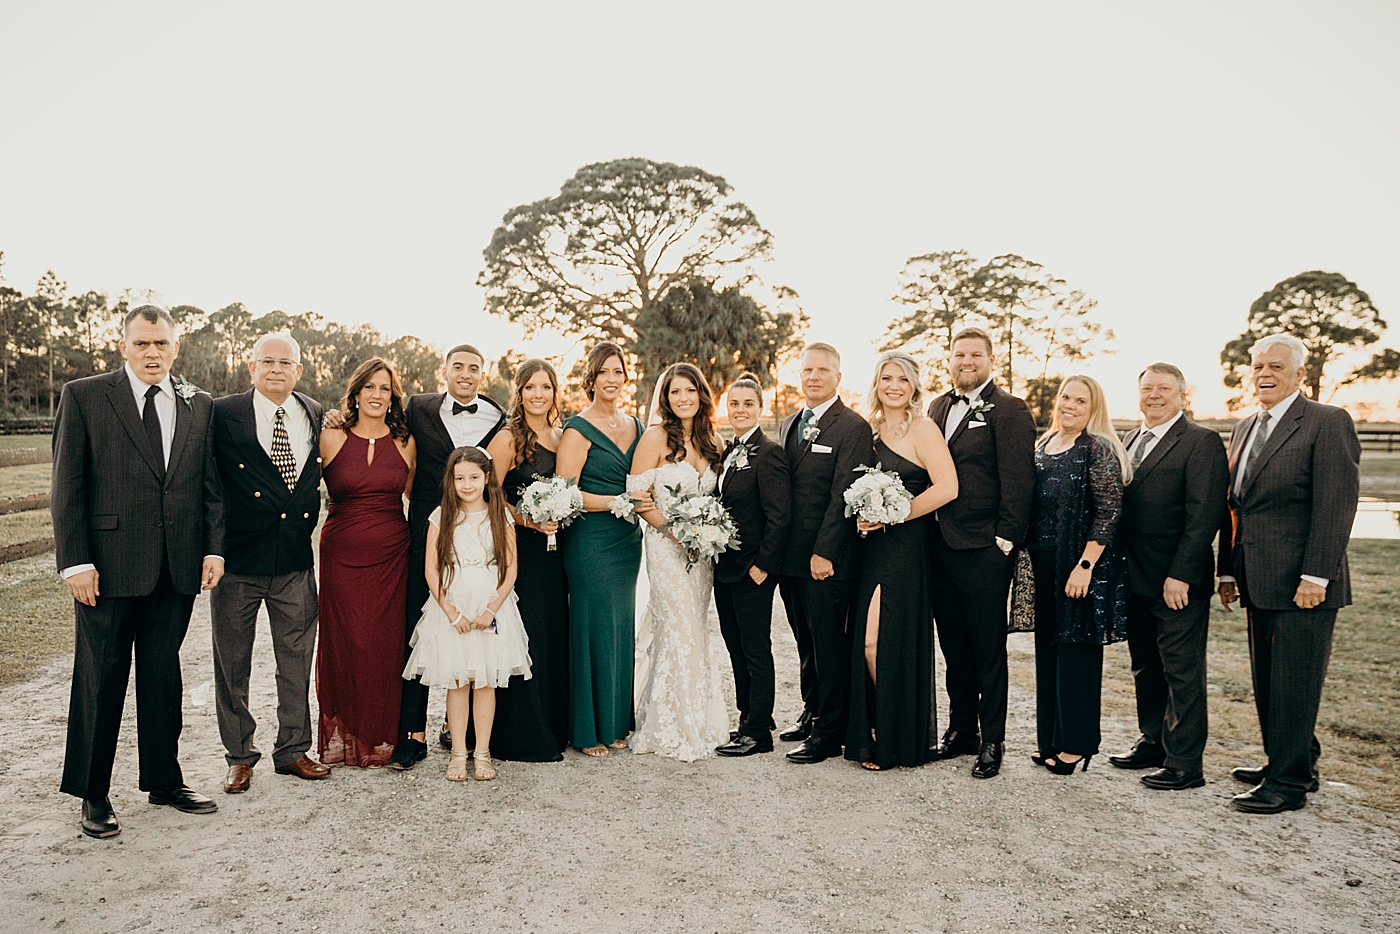 Portrait of Couple and Family picture Ever After Farms Wedding Photography captured by South Florida Wedding Photographer Maggie Alvarez Photography